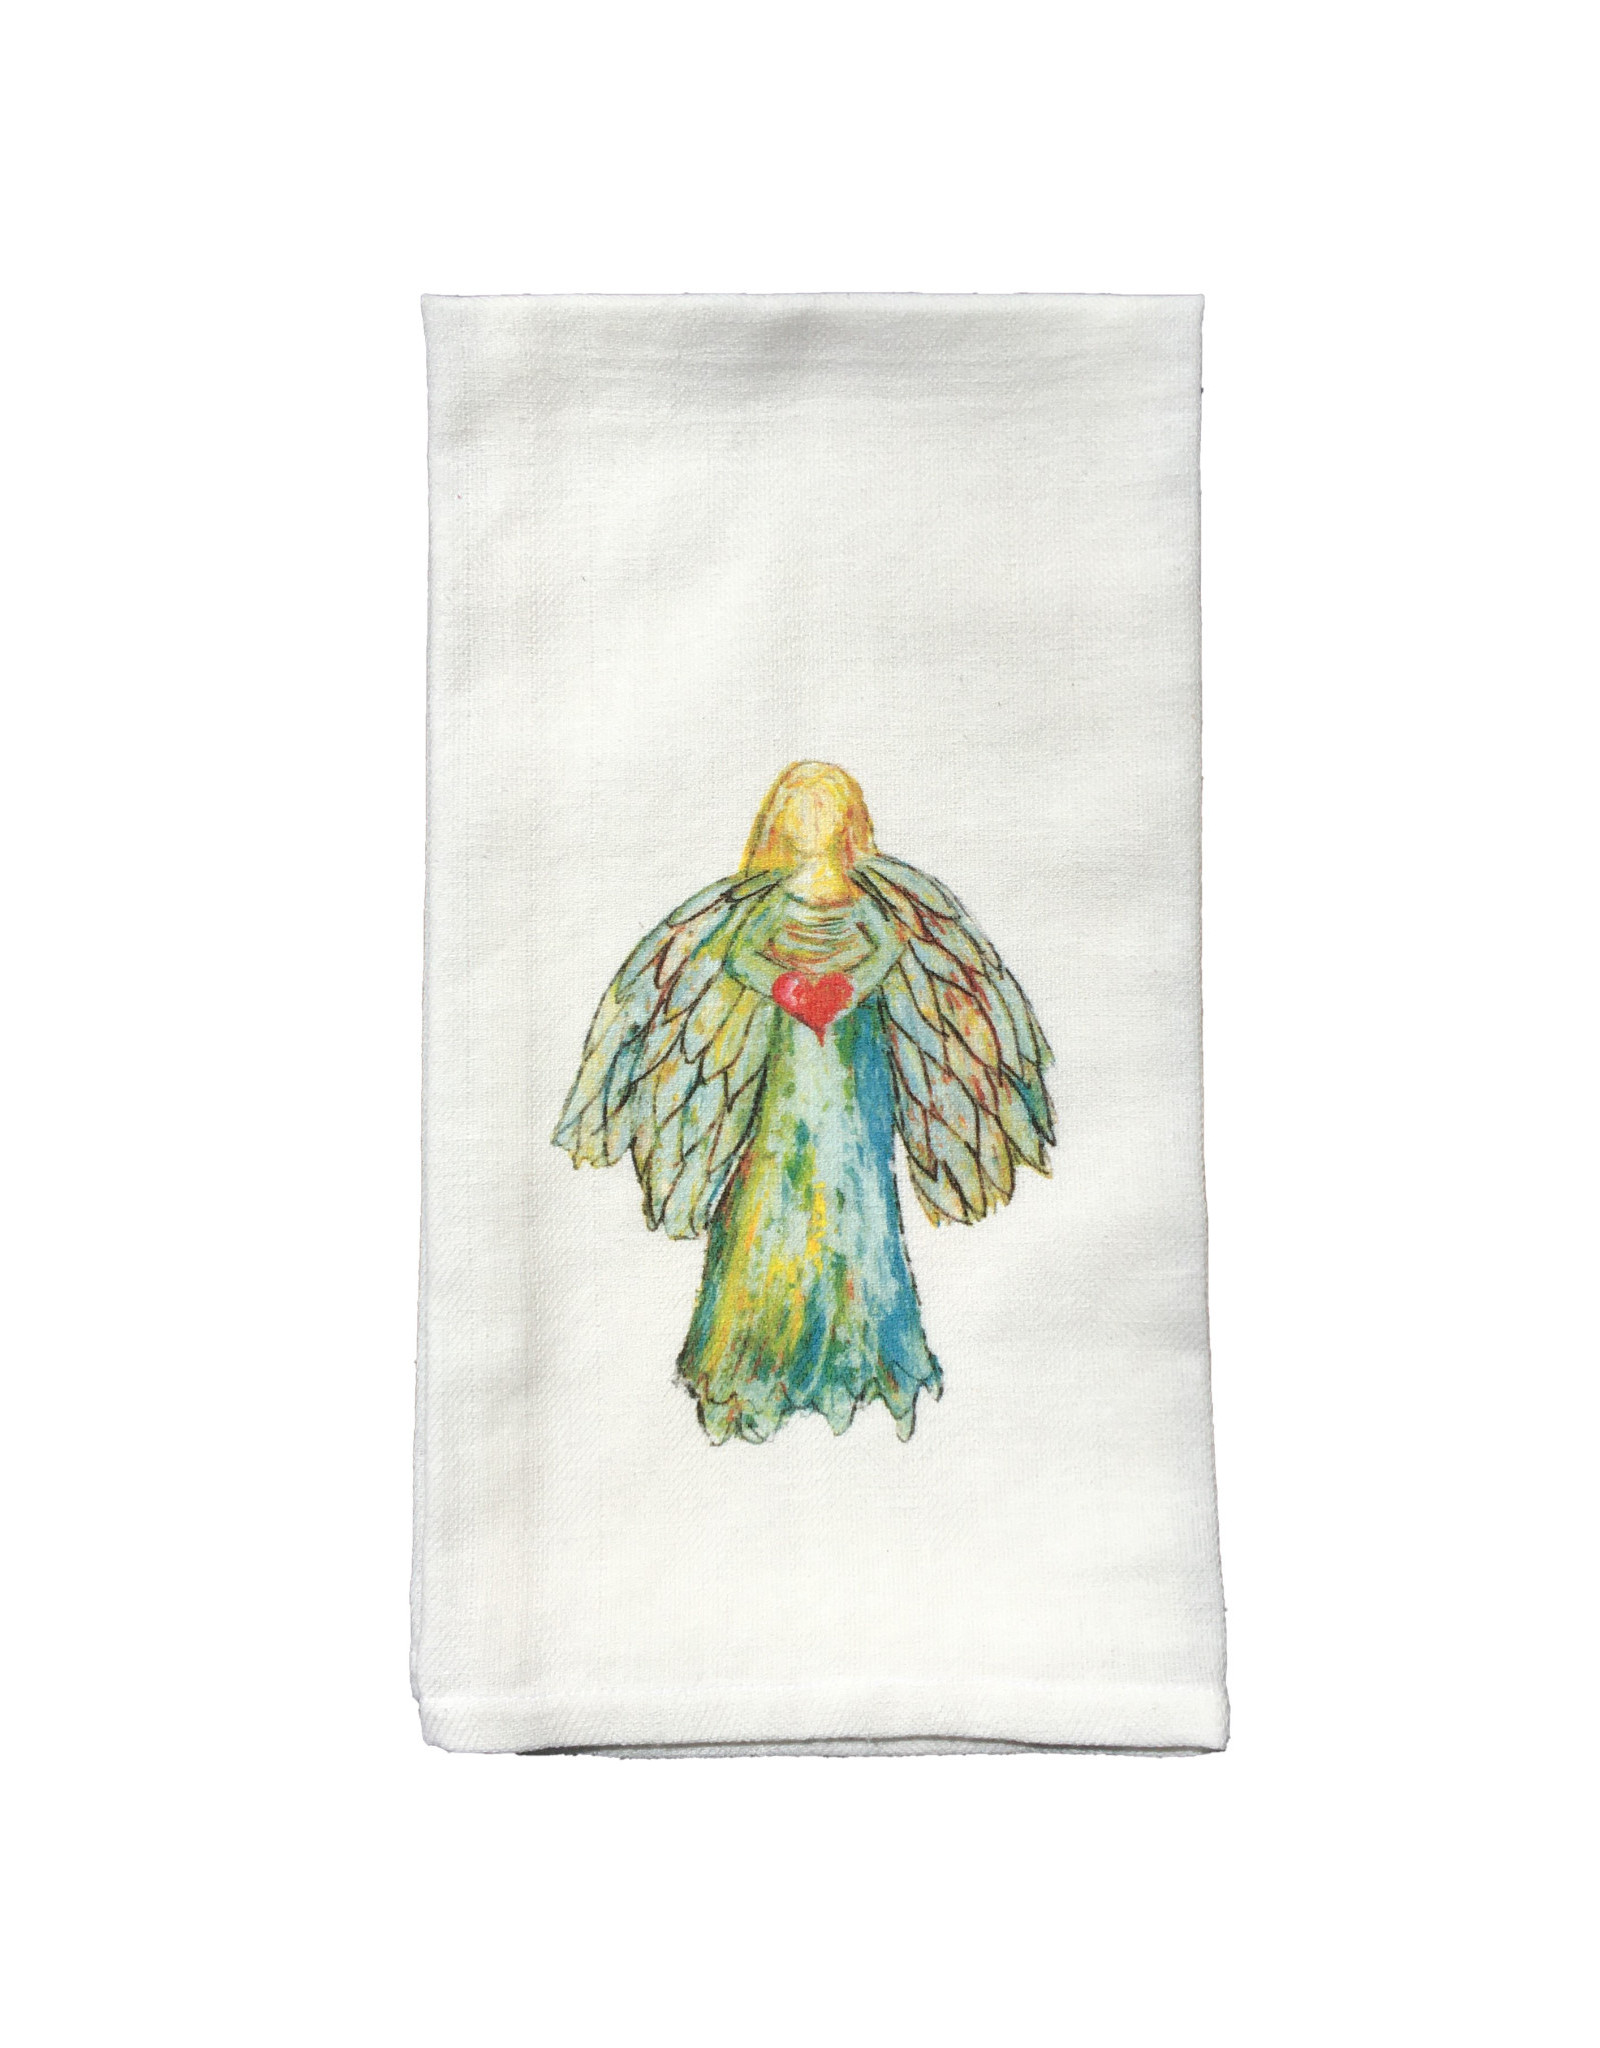 Towel - Colorful Angel with Heart